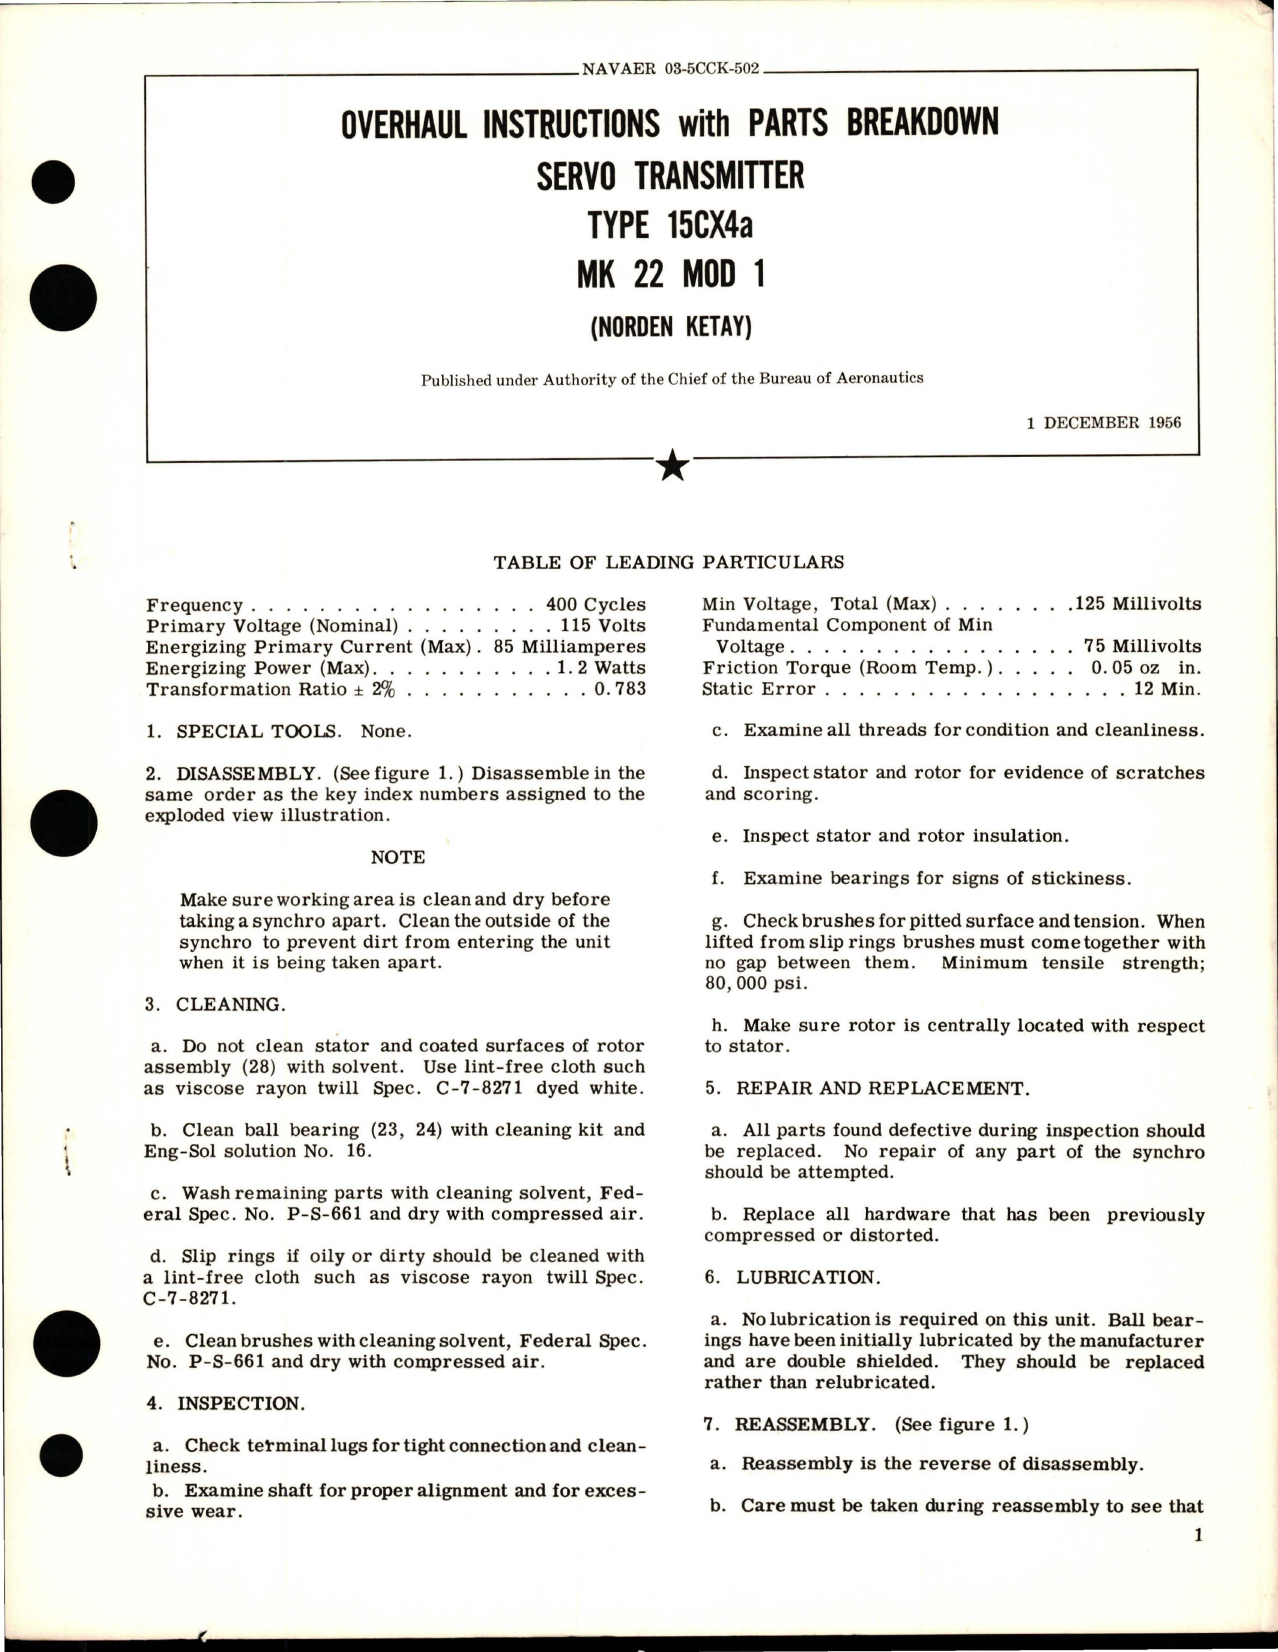 Sample page 1 from AirCorps Library document: Overhaul Instructions with Parts Breakdown for Servo Transmitter - Type 15CX4a - MK 22 MOD 1